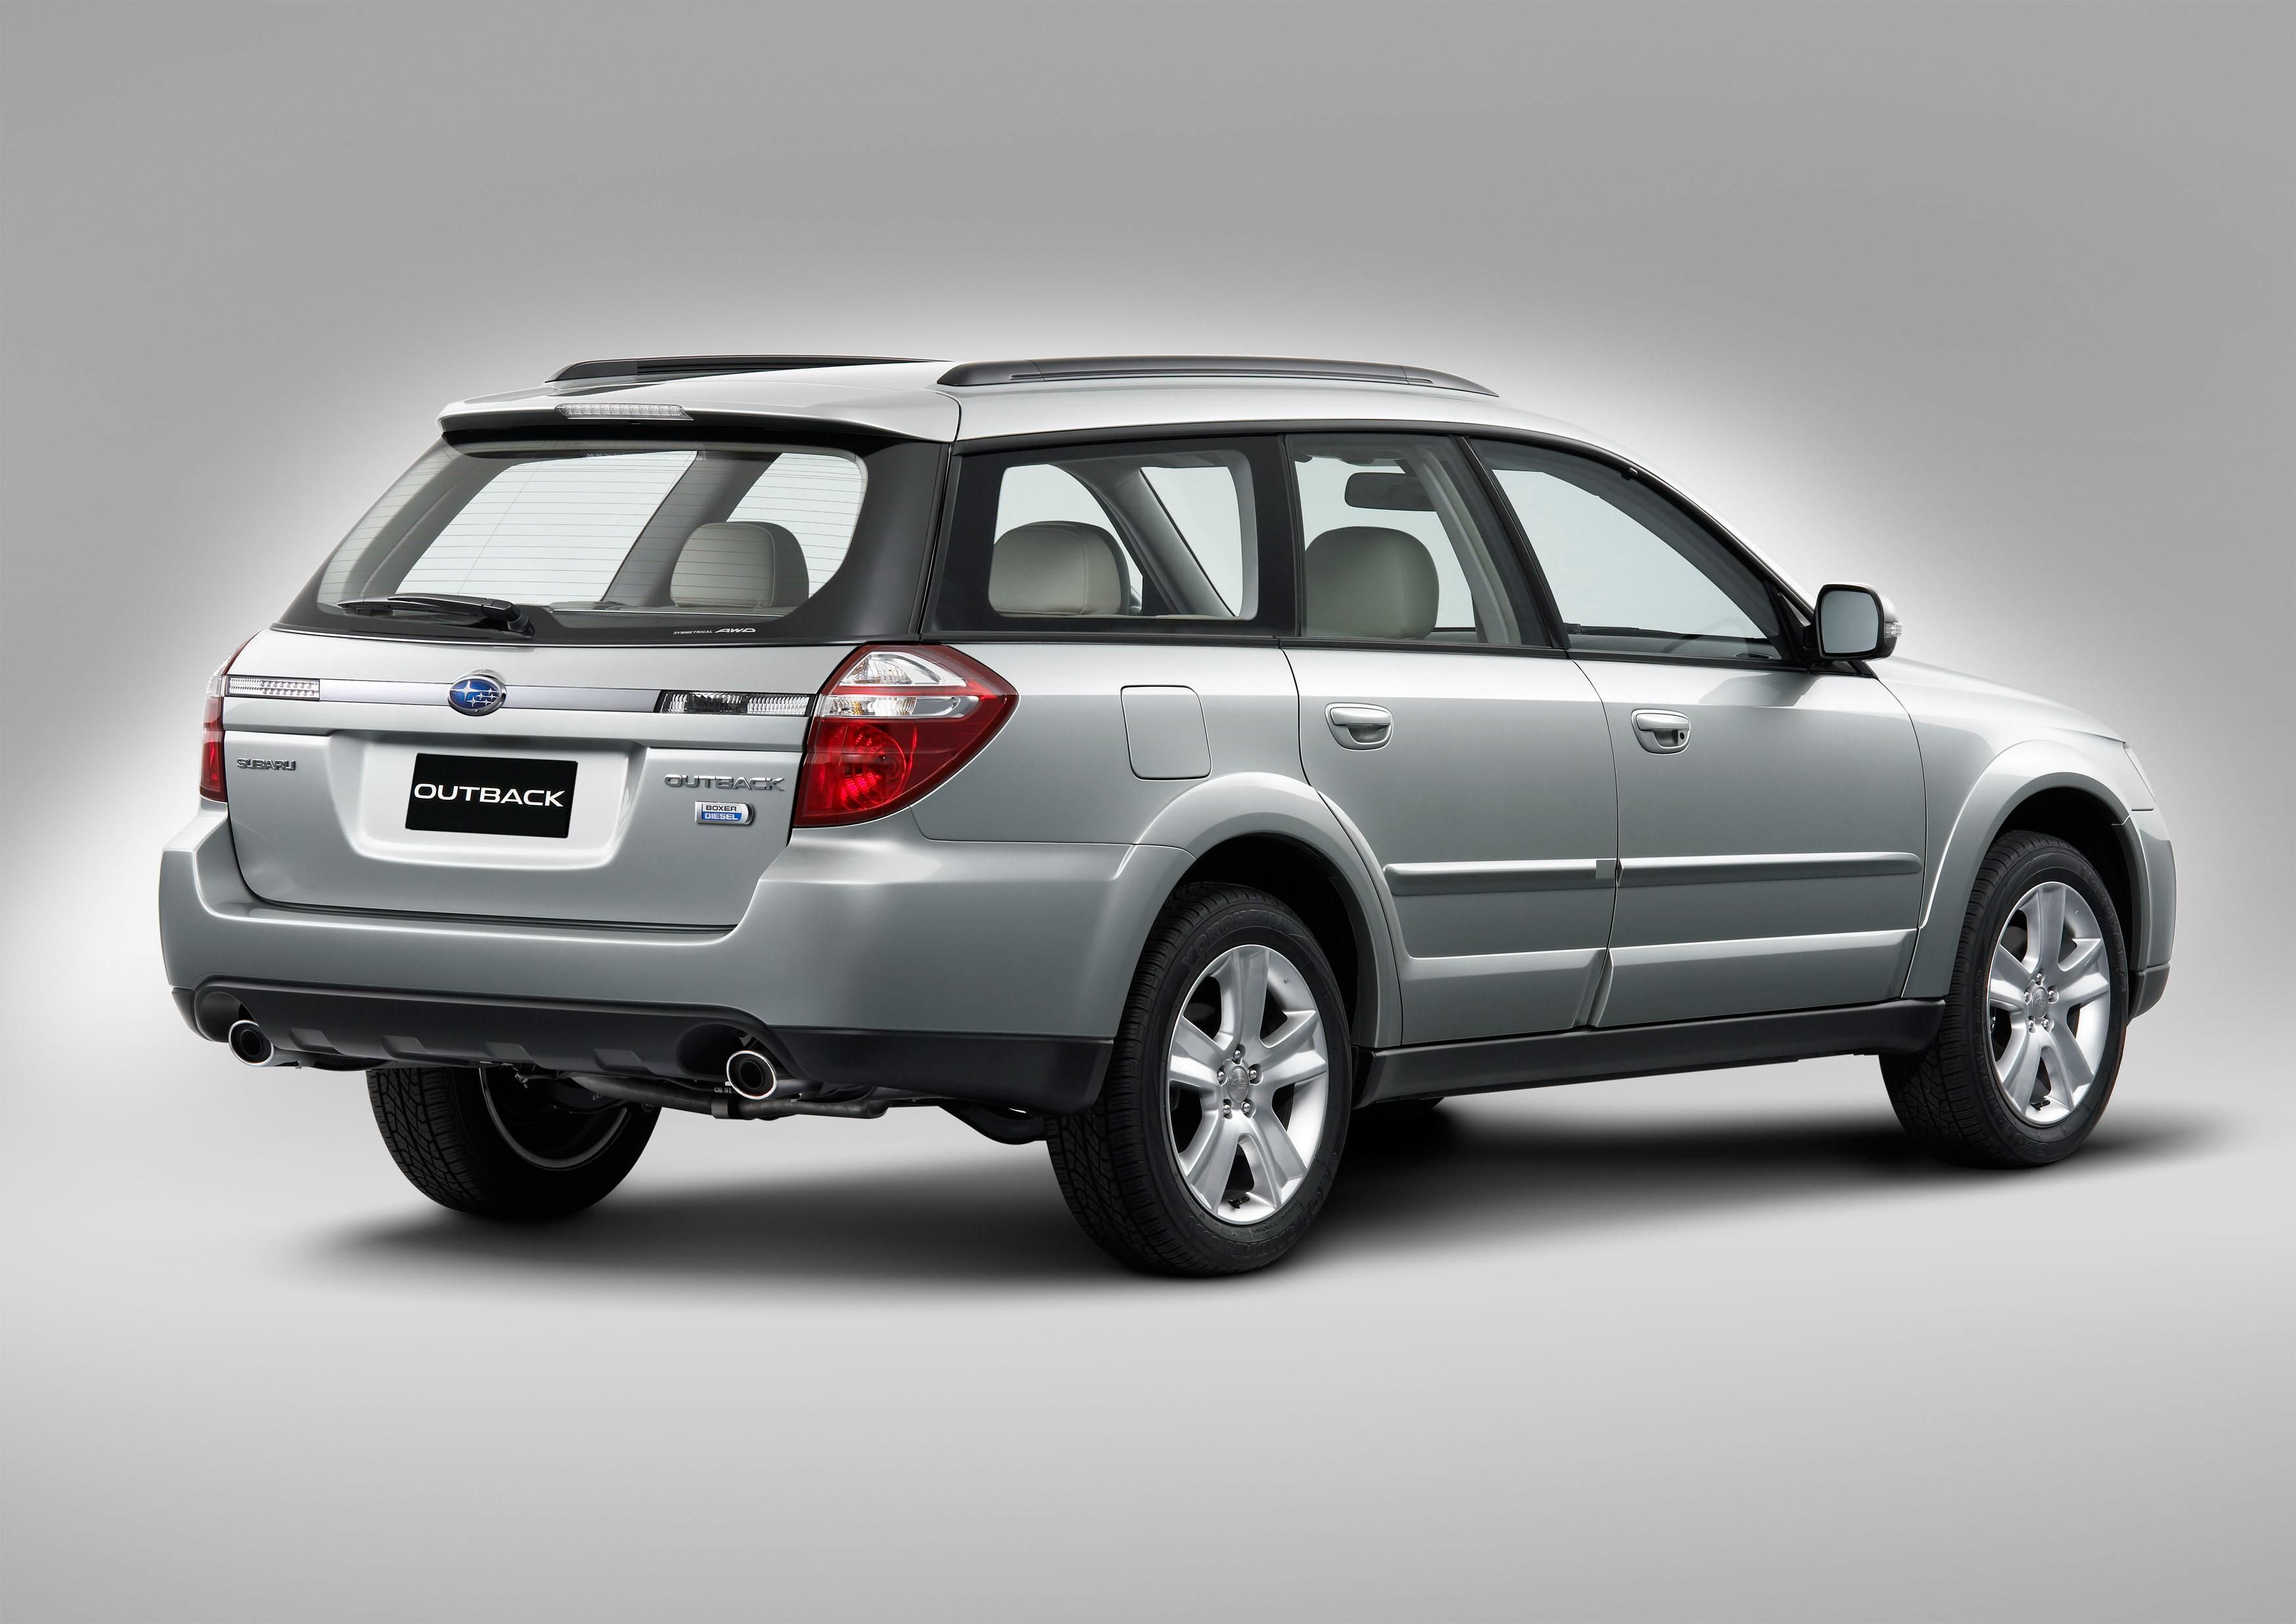 2008 Subaru Legacy 2.0D and Outback 2.0D